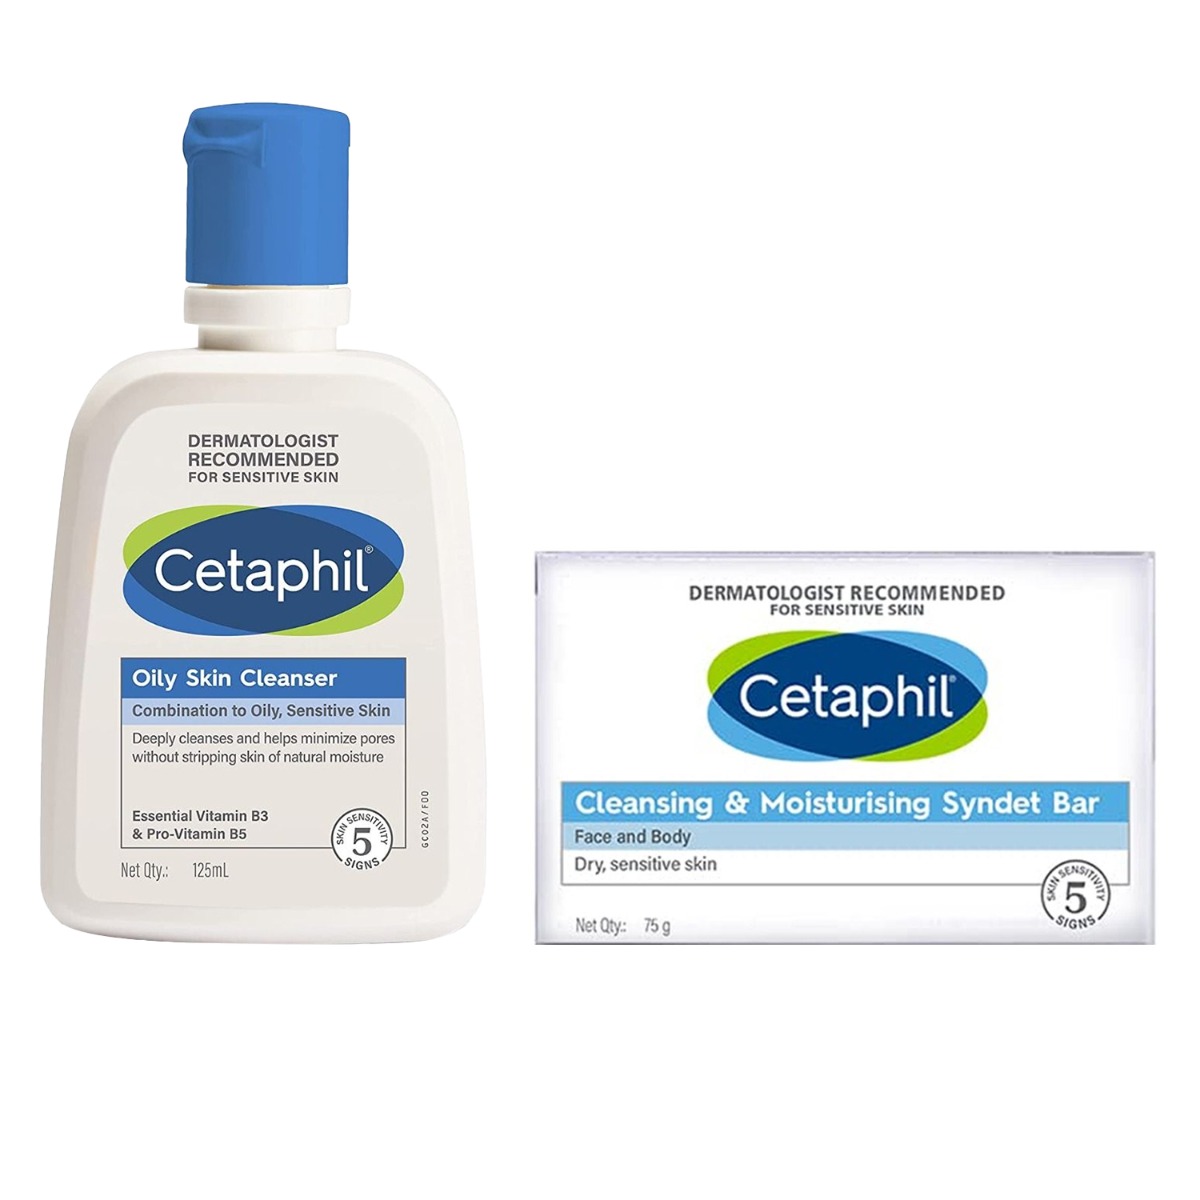 Cetaphil Cleansing And Moisturising Syndet Bar For Face & Body, 75gm & Oily Skin Cleanser Combination to Oily, Sensitive Skin, 125ml